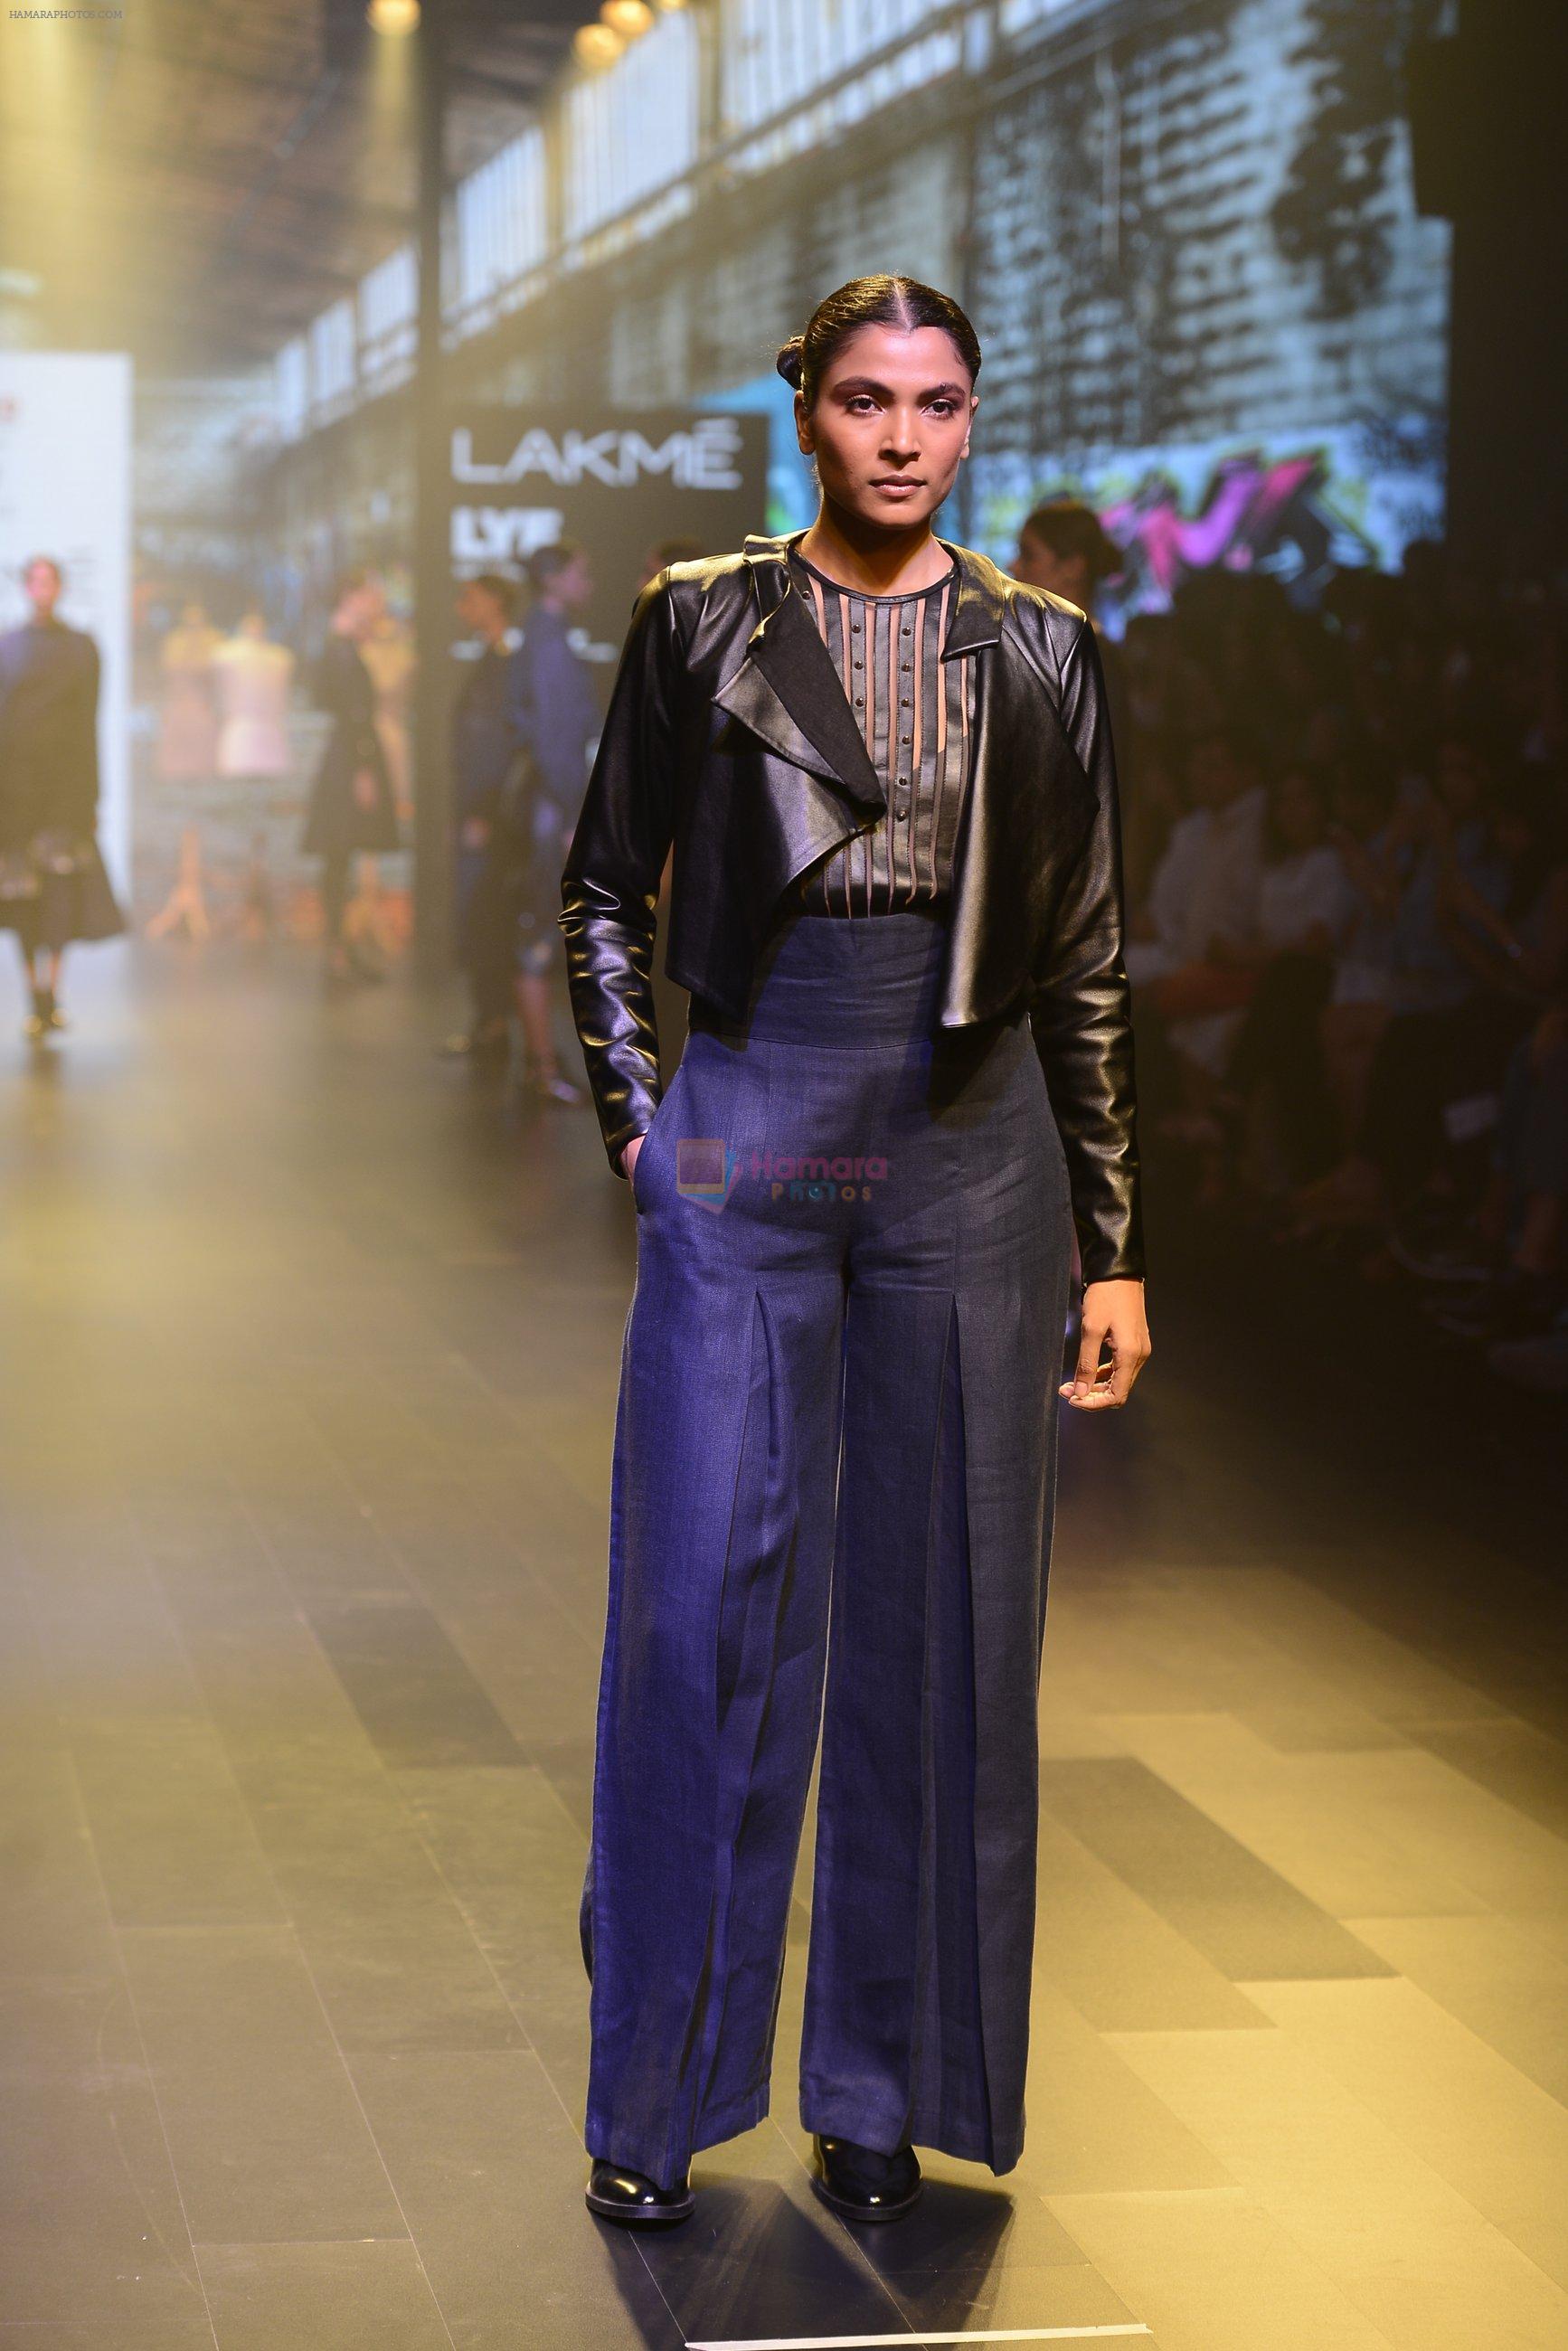 at Gen Next Show at Lakme Fashion Week 2016 on 24th Aug 2016